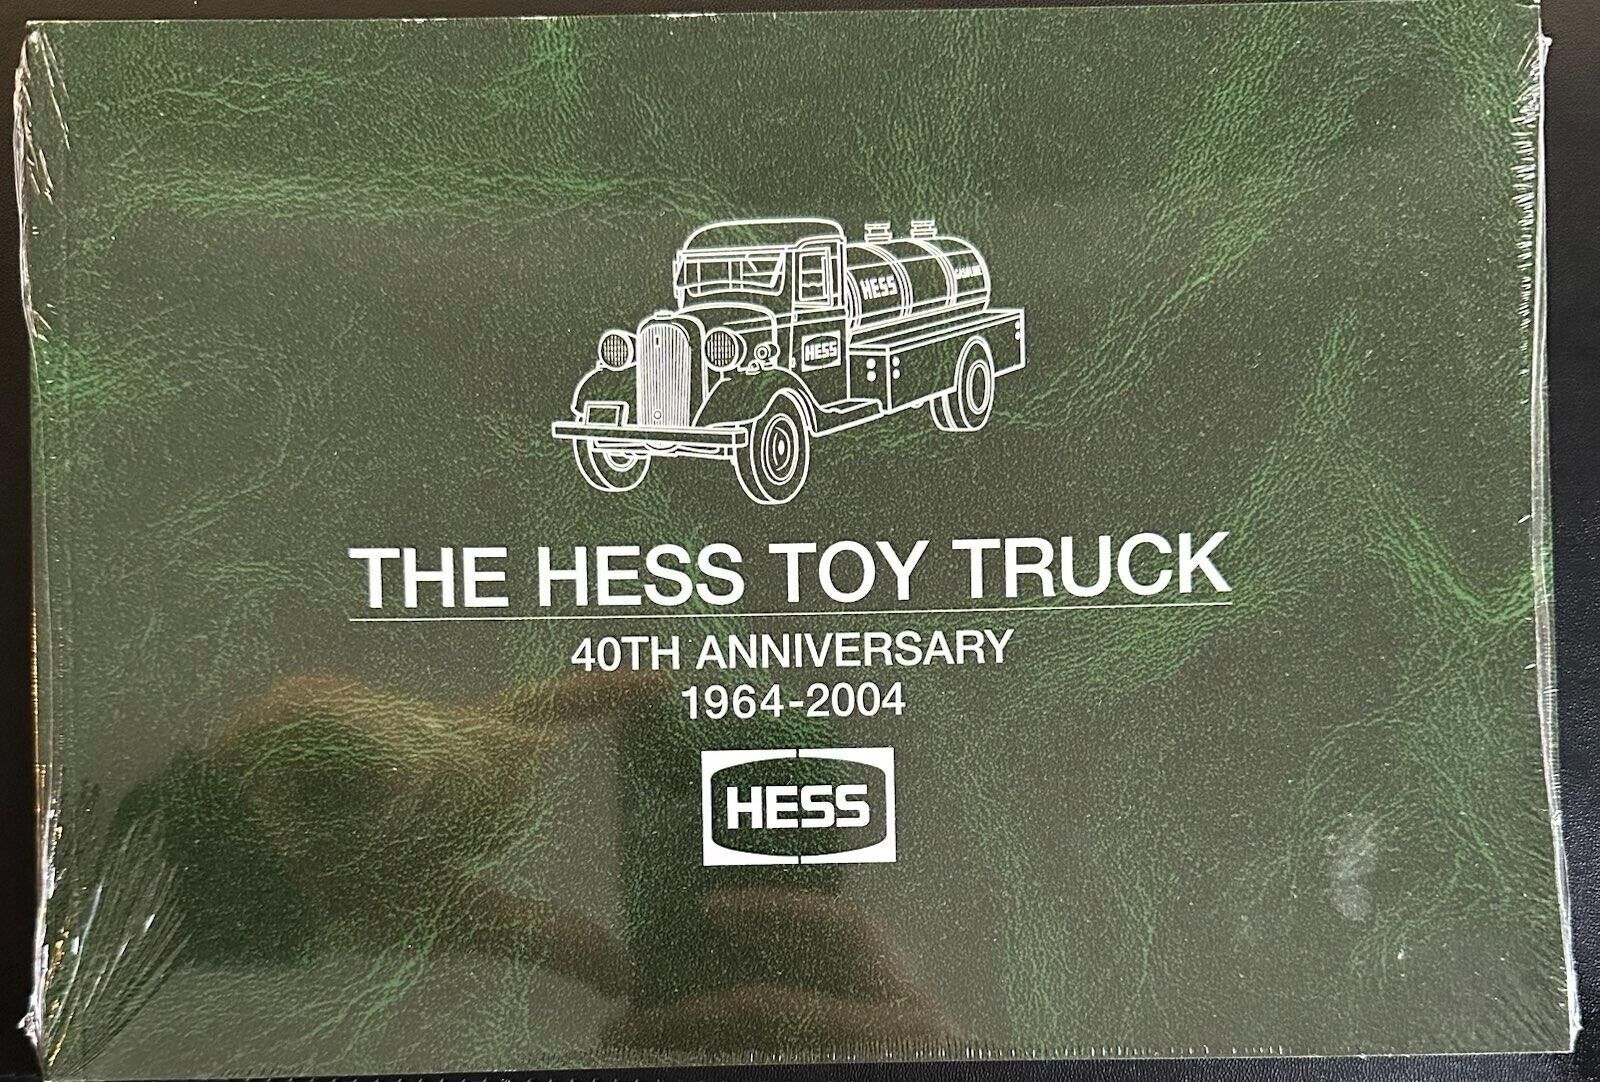 2004 THE HESS TOY TRUCK 40TH ANNIVERSARY 1964-2004 Catalog Book